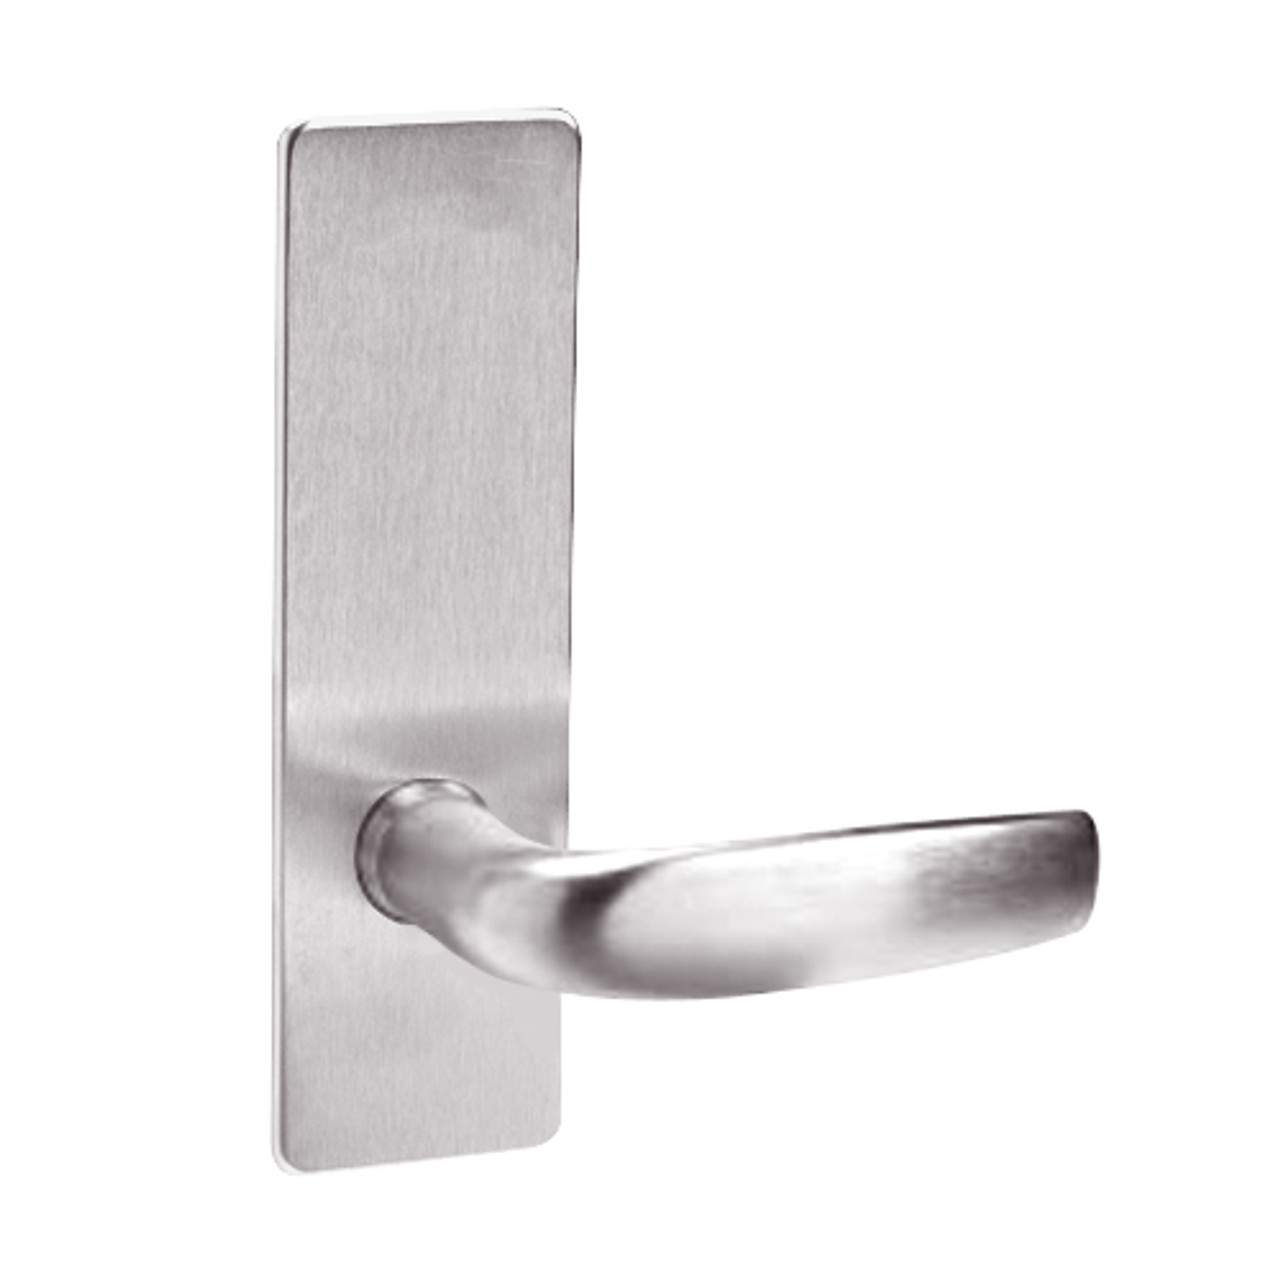 ML2030-CSR-629-M31 Corbin Russwin ML2000 Series Mortise Privacy Locksets with Citation Lever in Bright Stainless Steel